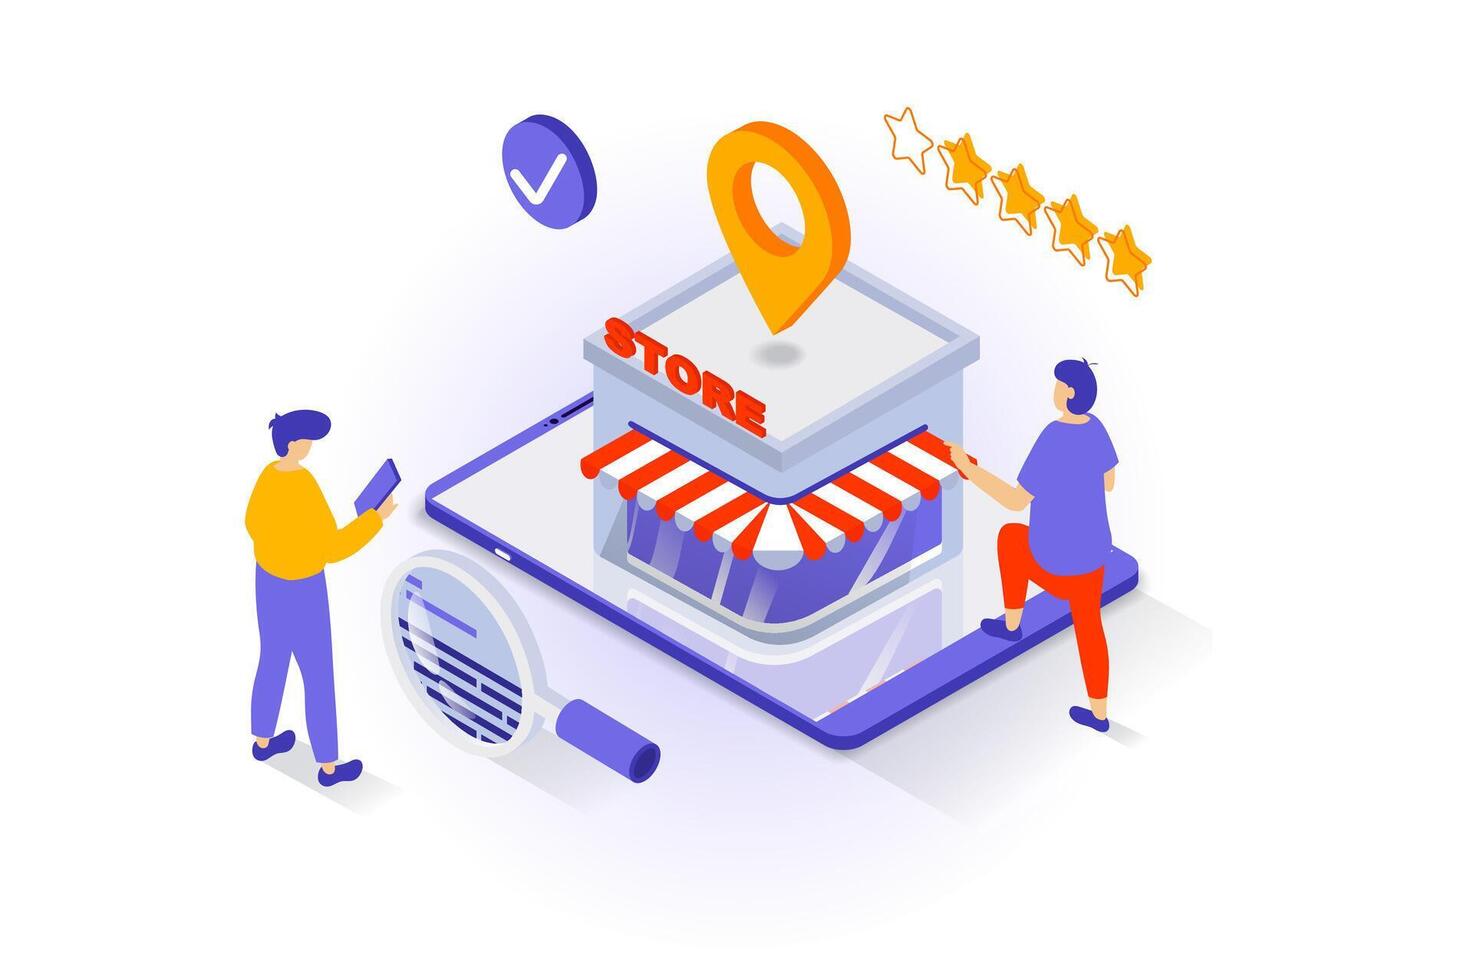 Online shopping concept in 3d isometric design. People choosing store with good rating and clients experience, make purchases and give feedback. Vector illustration with isometry scene for web graphic